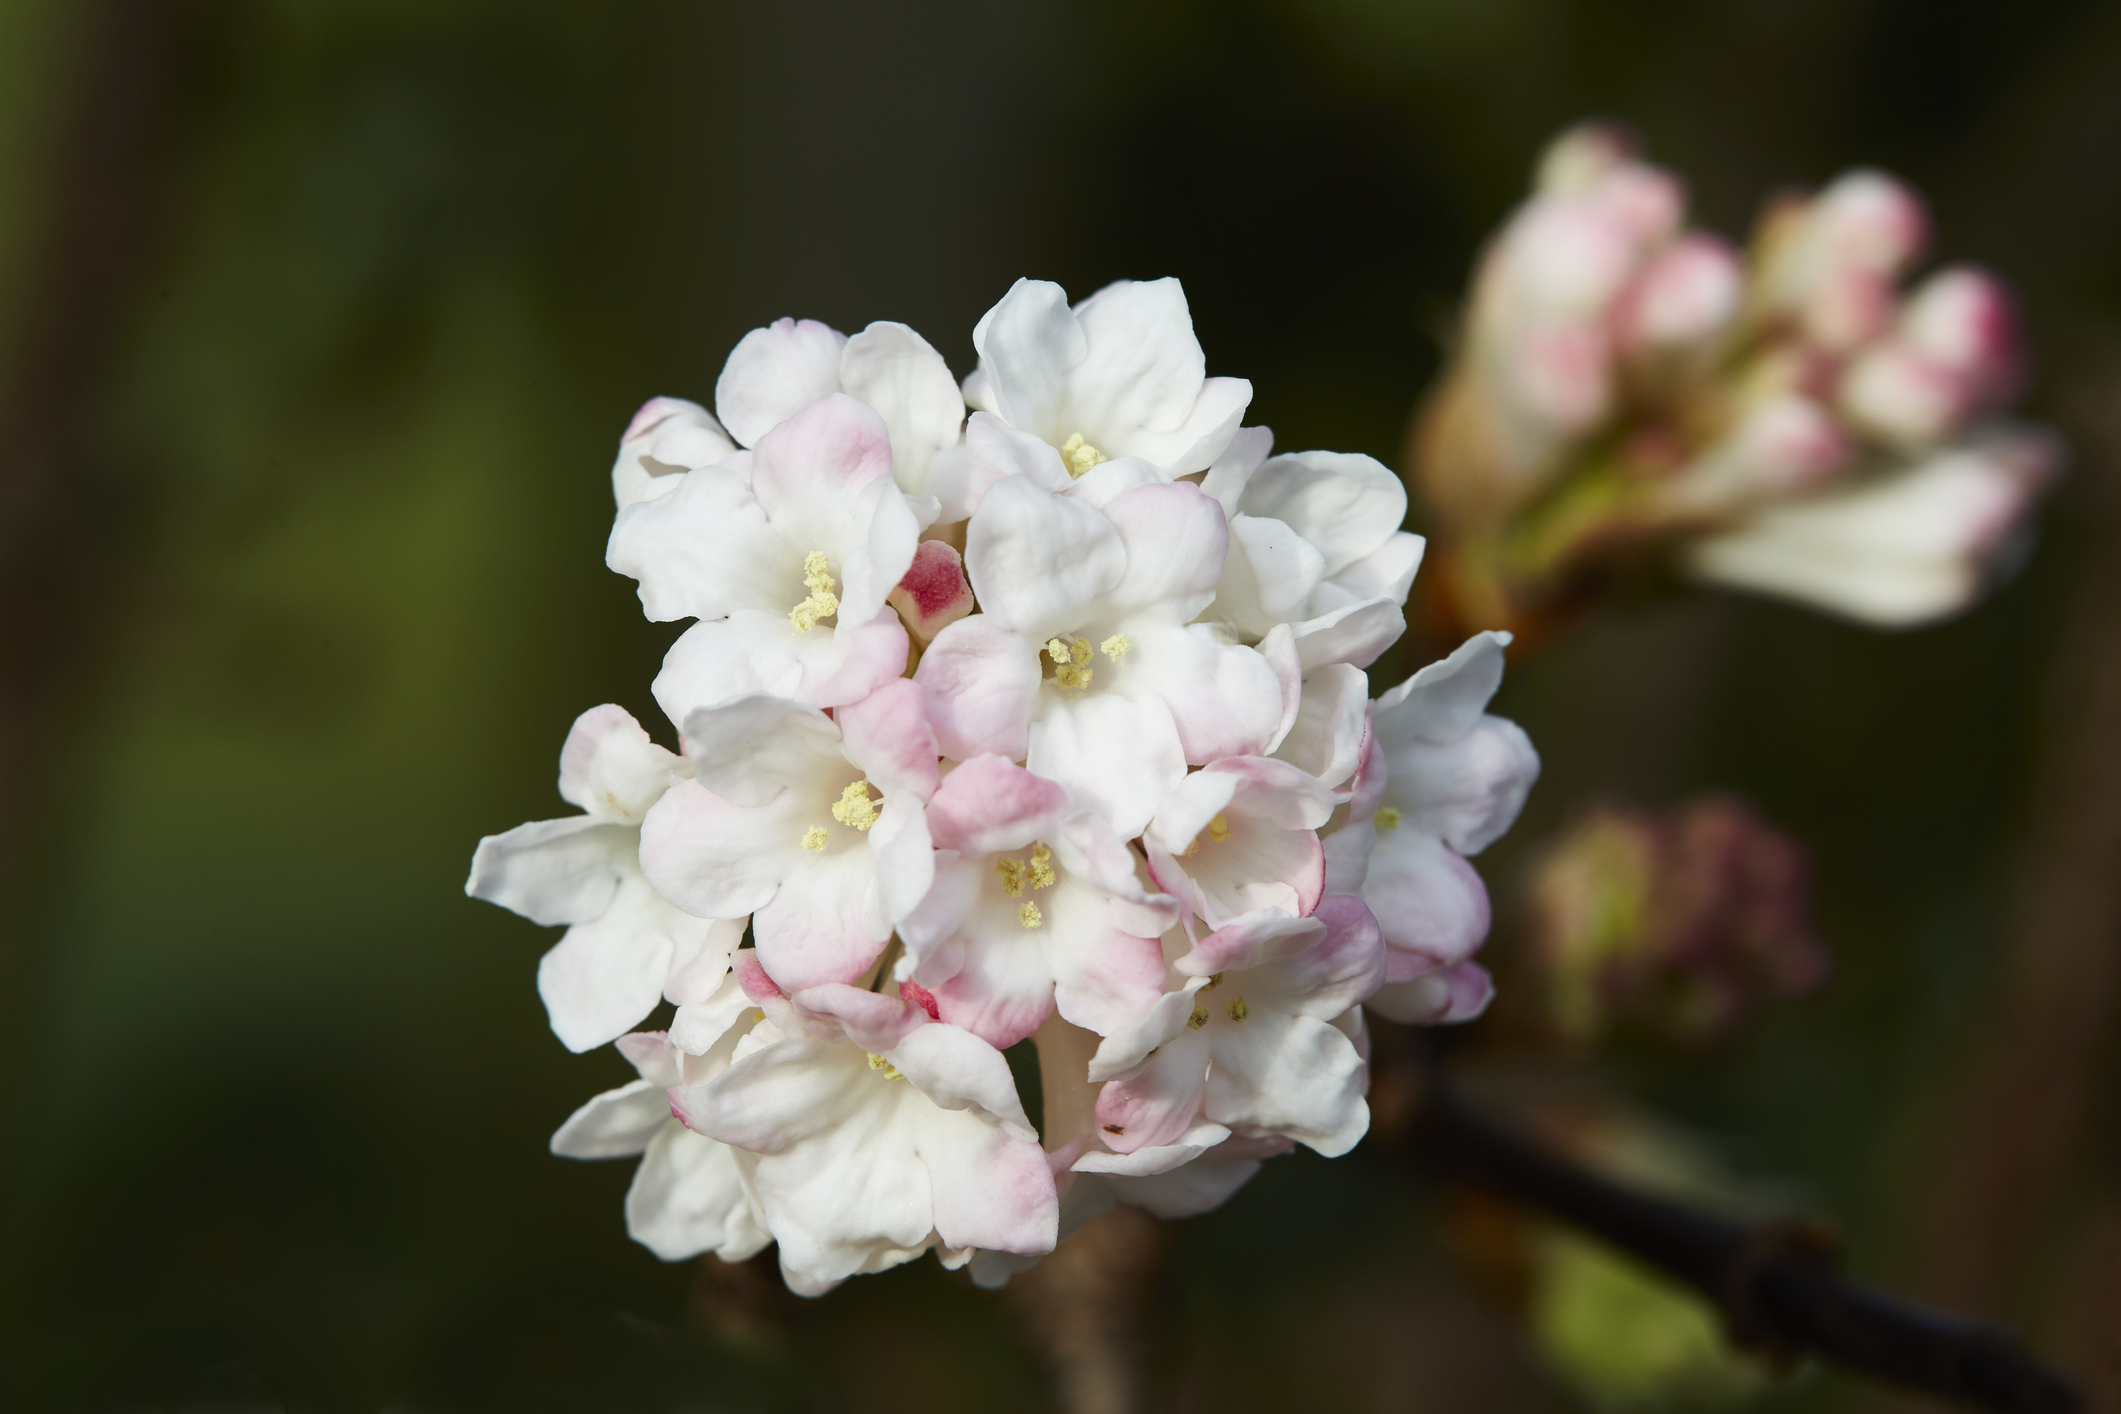 Check out these 5 shrubs for winter colour that aren't snowdrops | BT